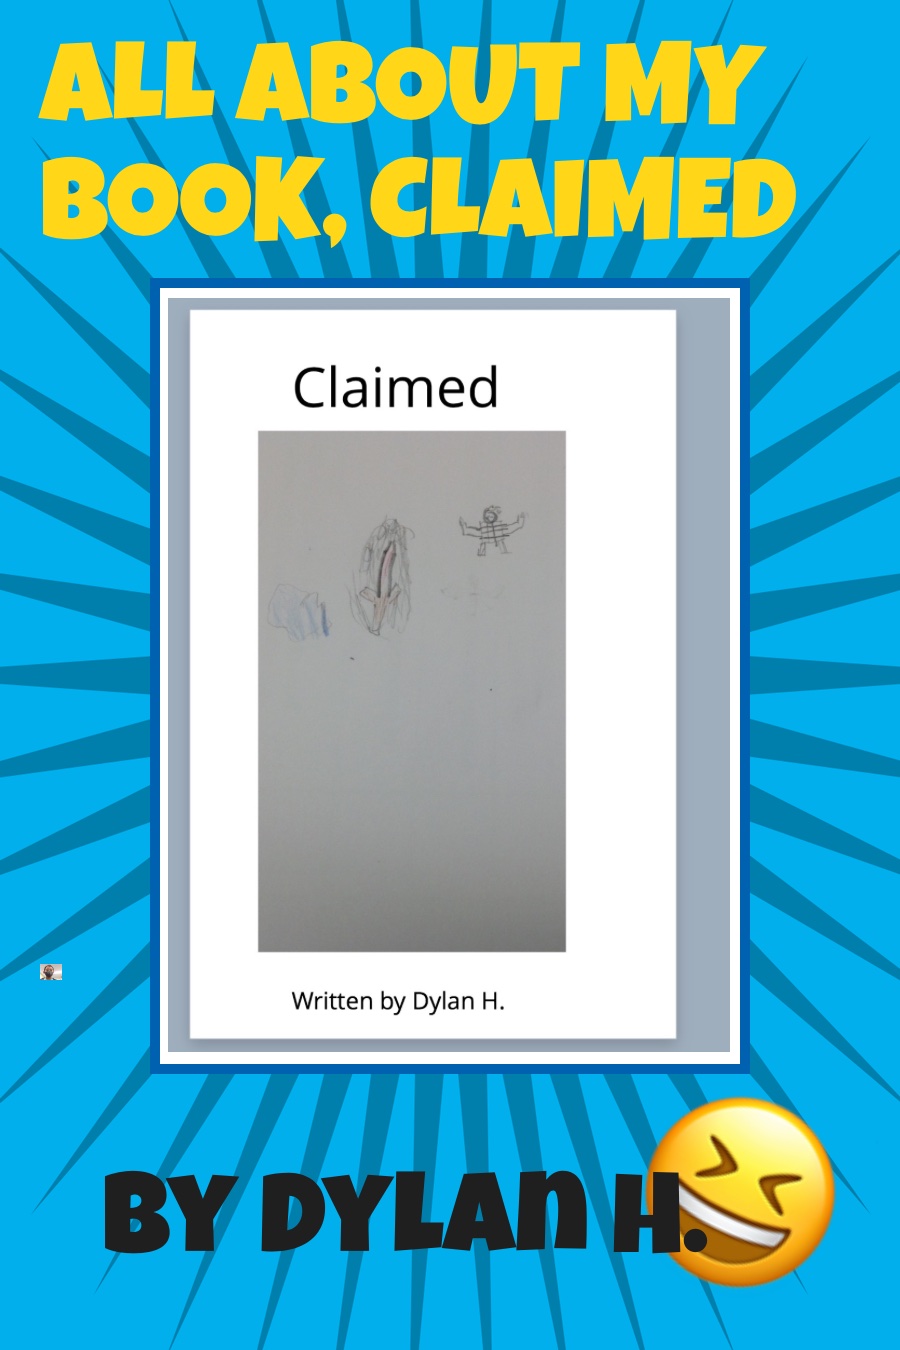 All About Claimed by Dylan H